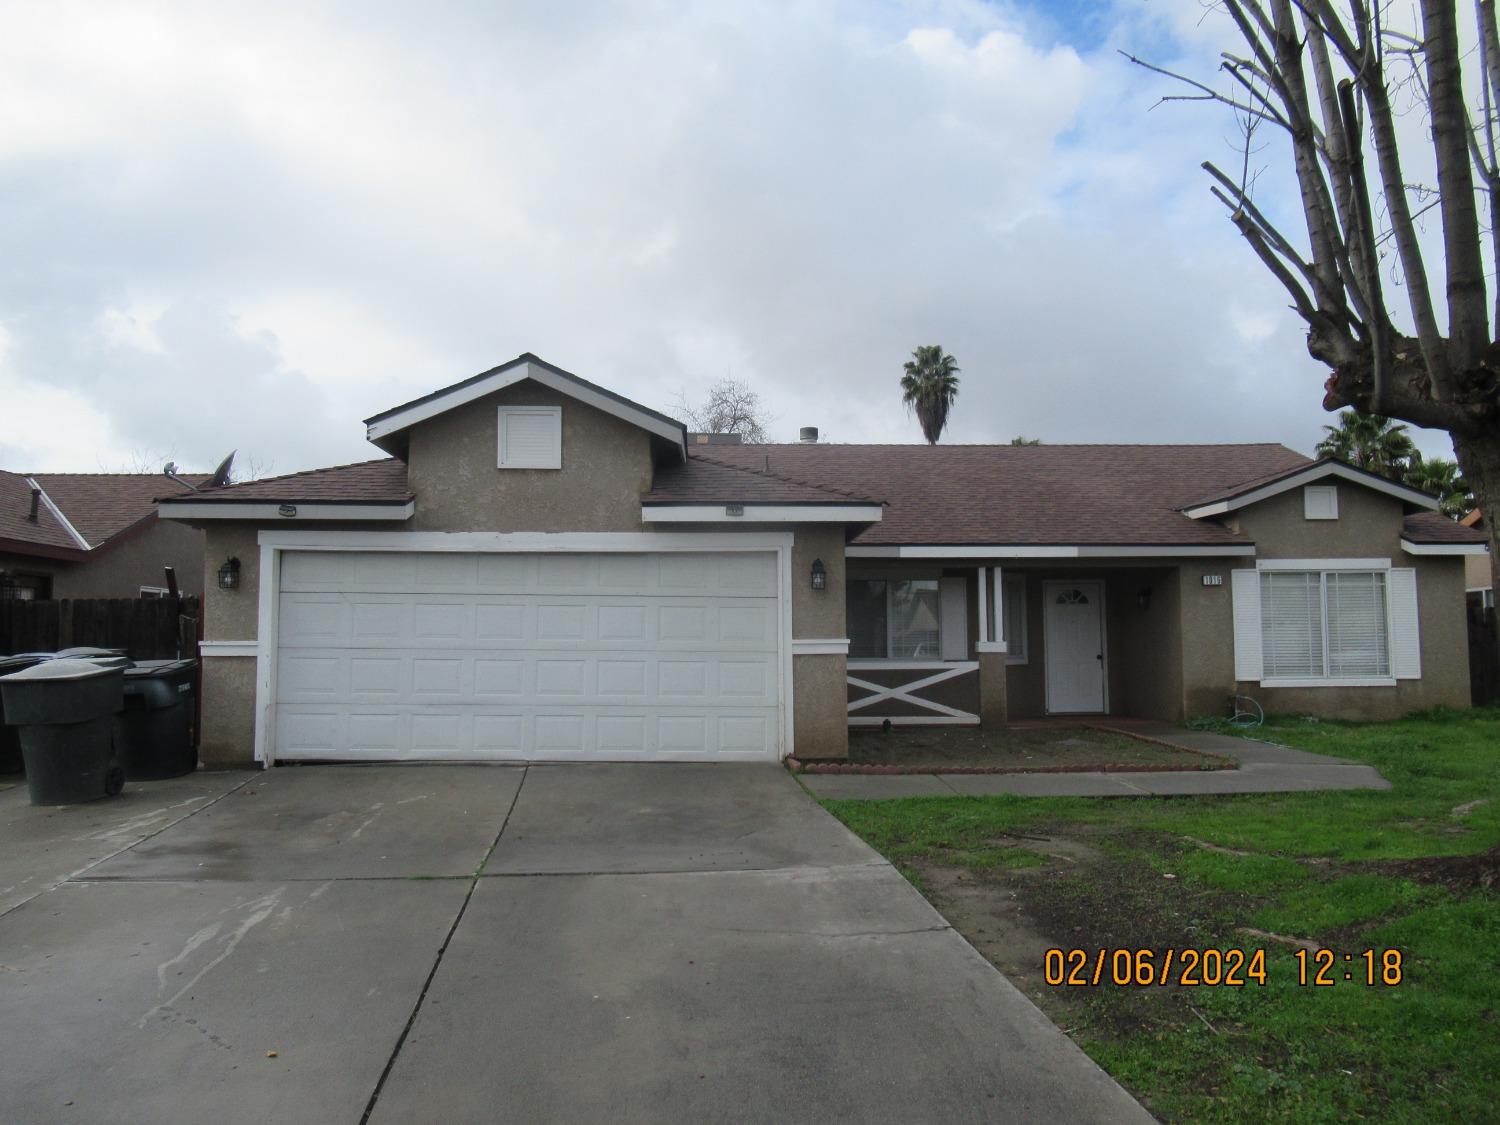 Photo of 1016 Summer Field Dr in Hanford, CA